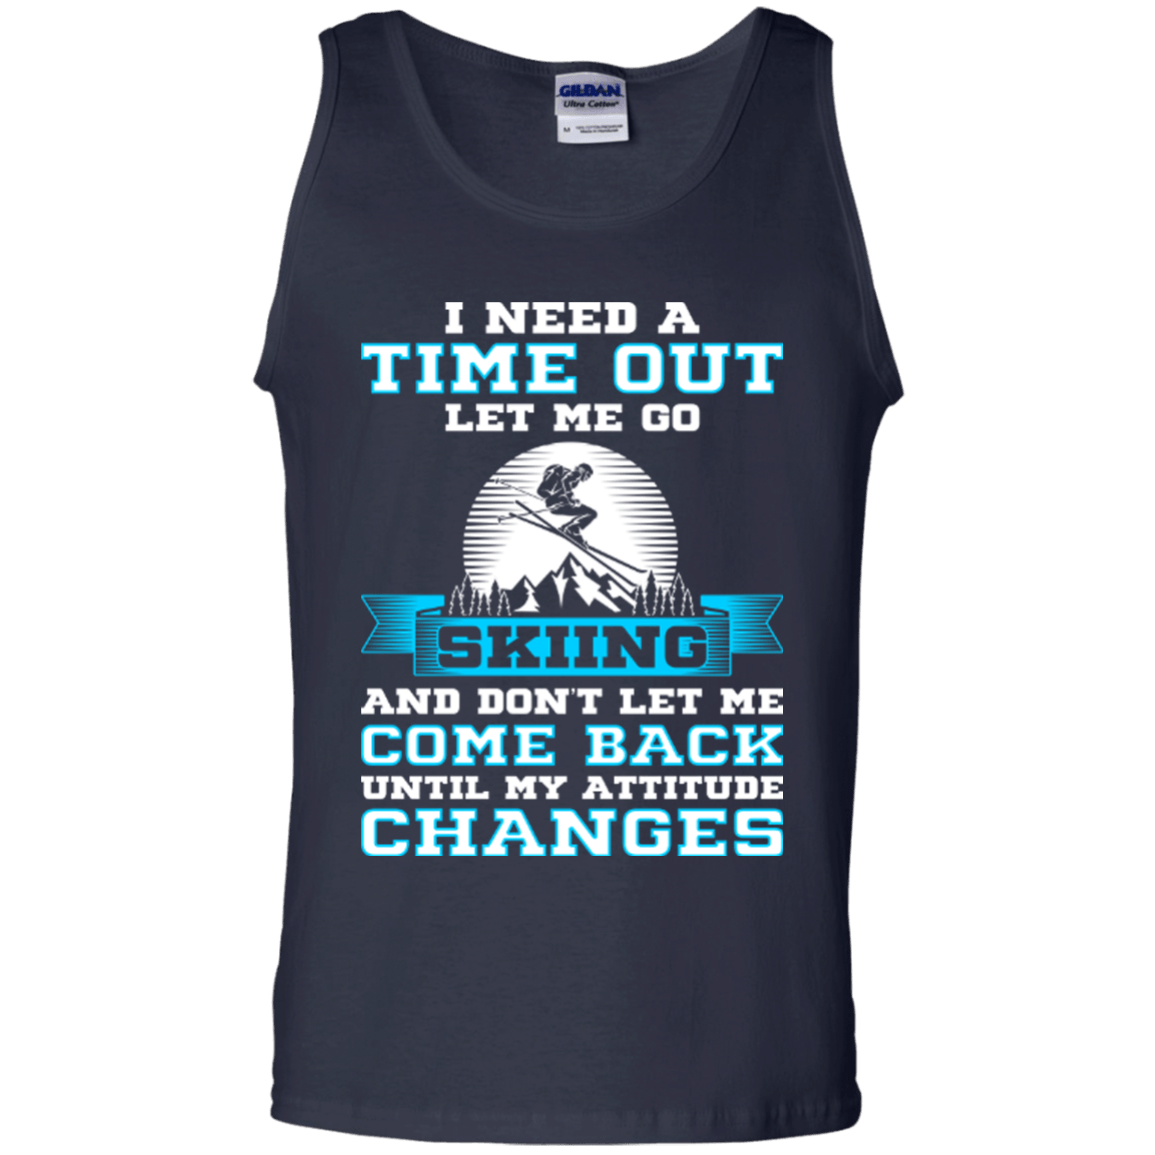 I Need A Time Out Let Me Go Skiing And Don't Let Me Come Back Until My Attitude Changes Tank Tops - Powderaddicts